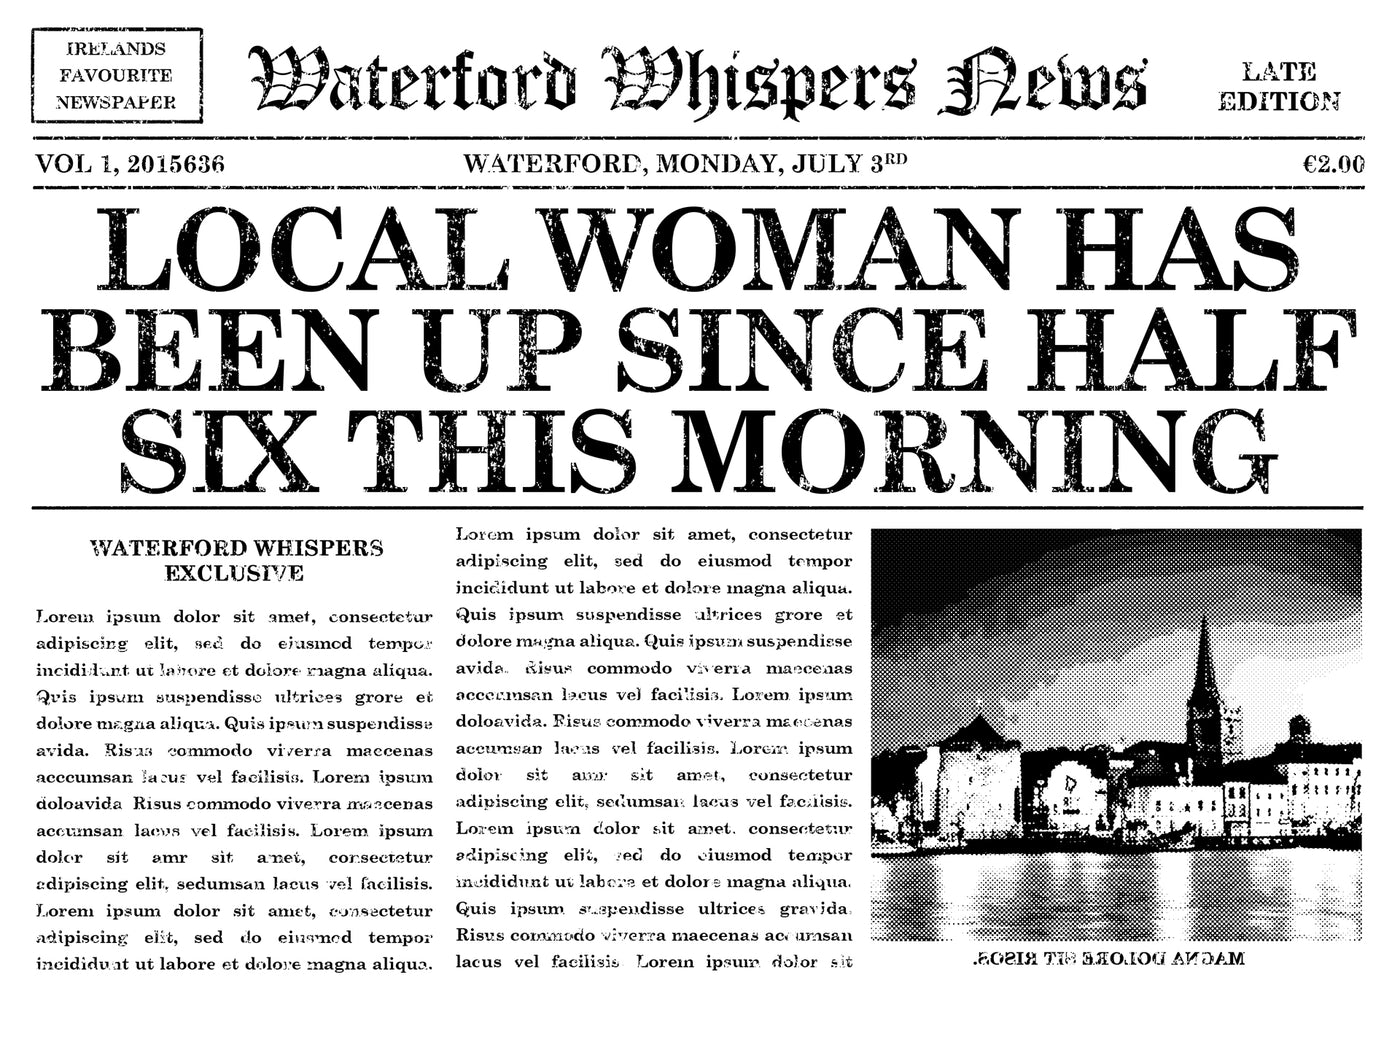 Local Woman Has Been Up Since Half Six This Morning - Premium WWN Headline T-shirt